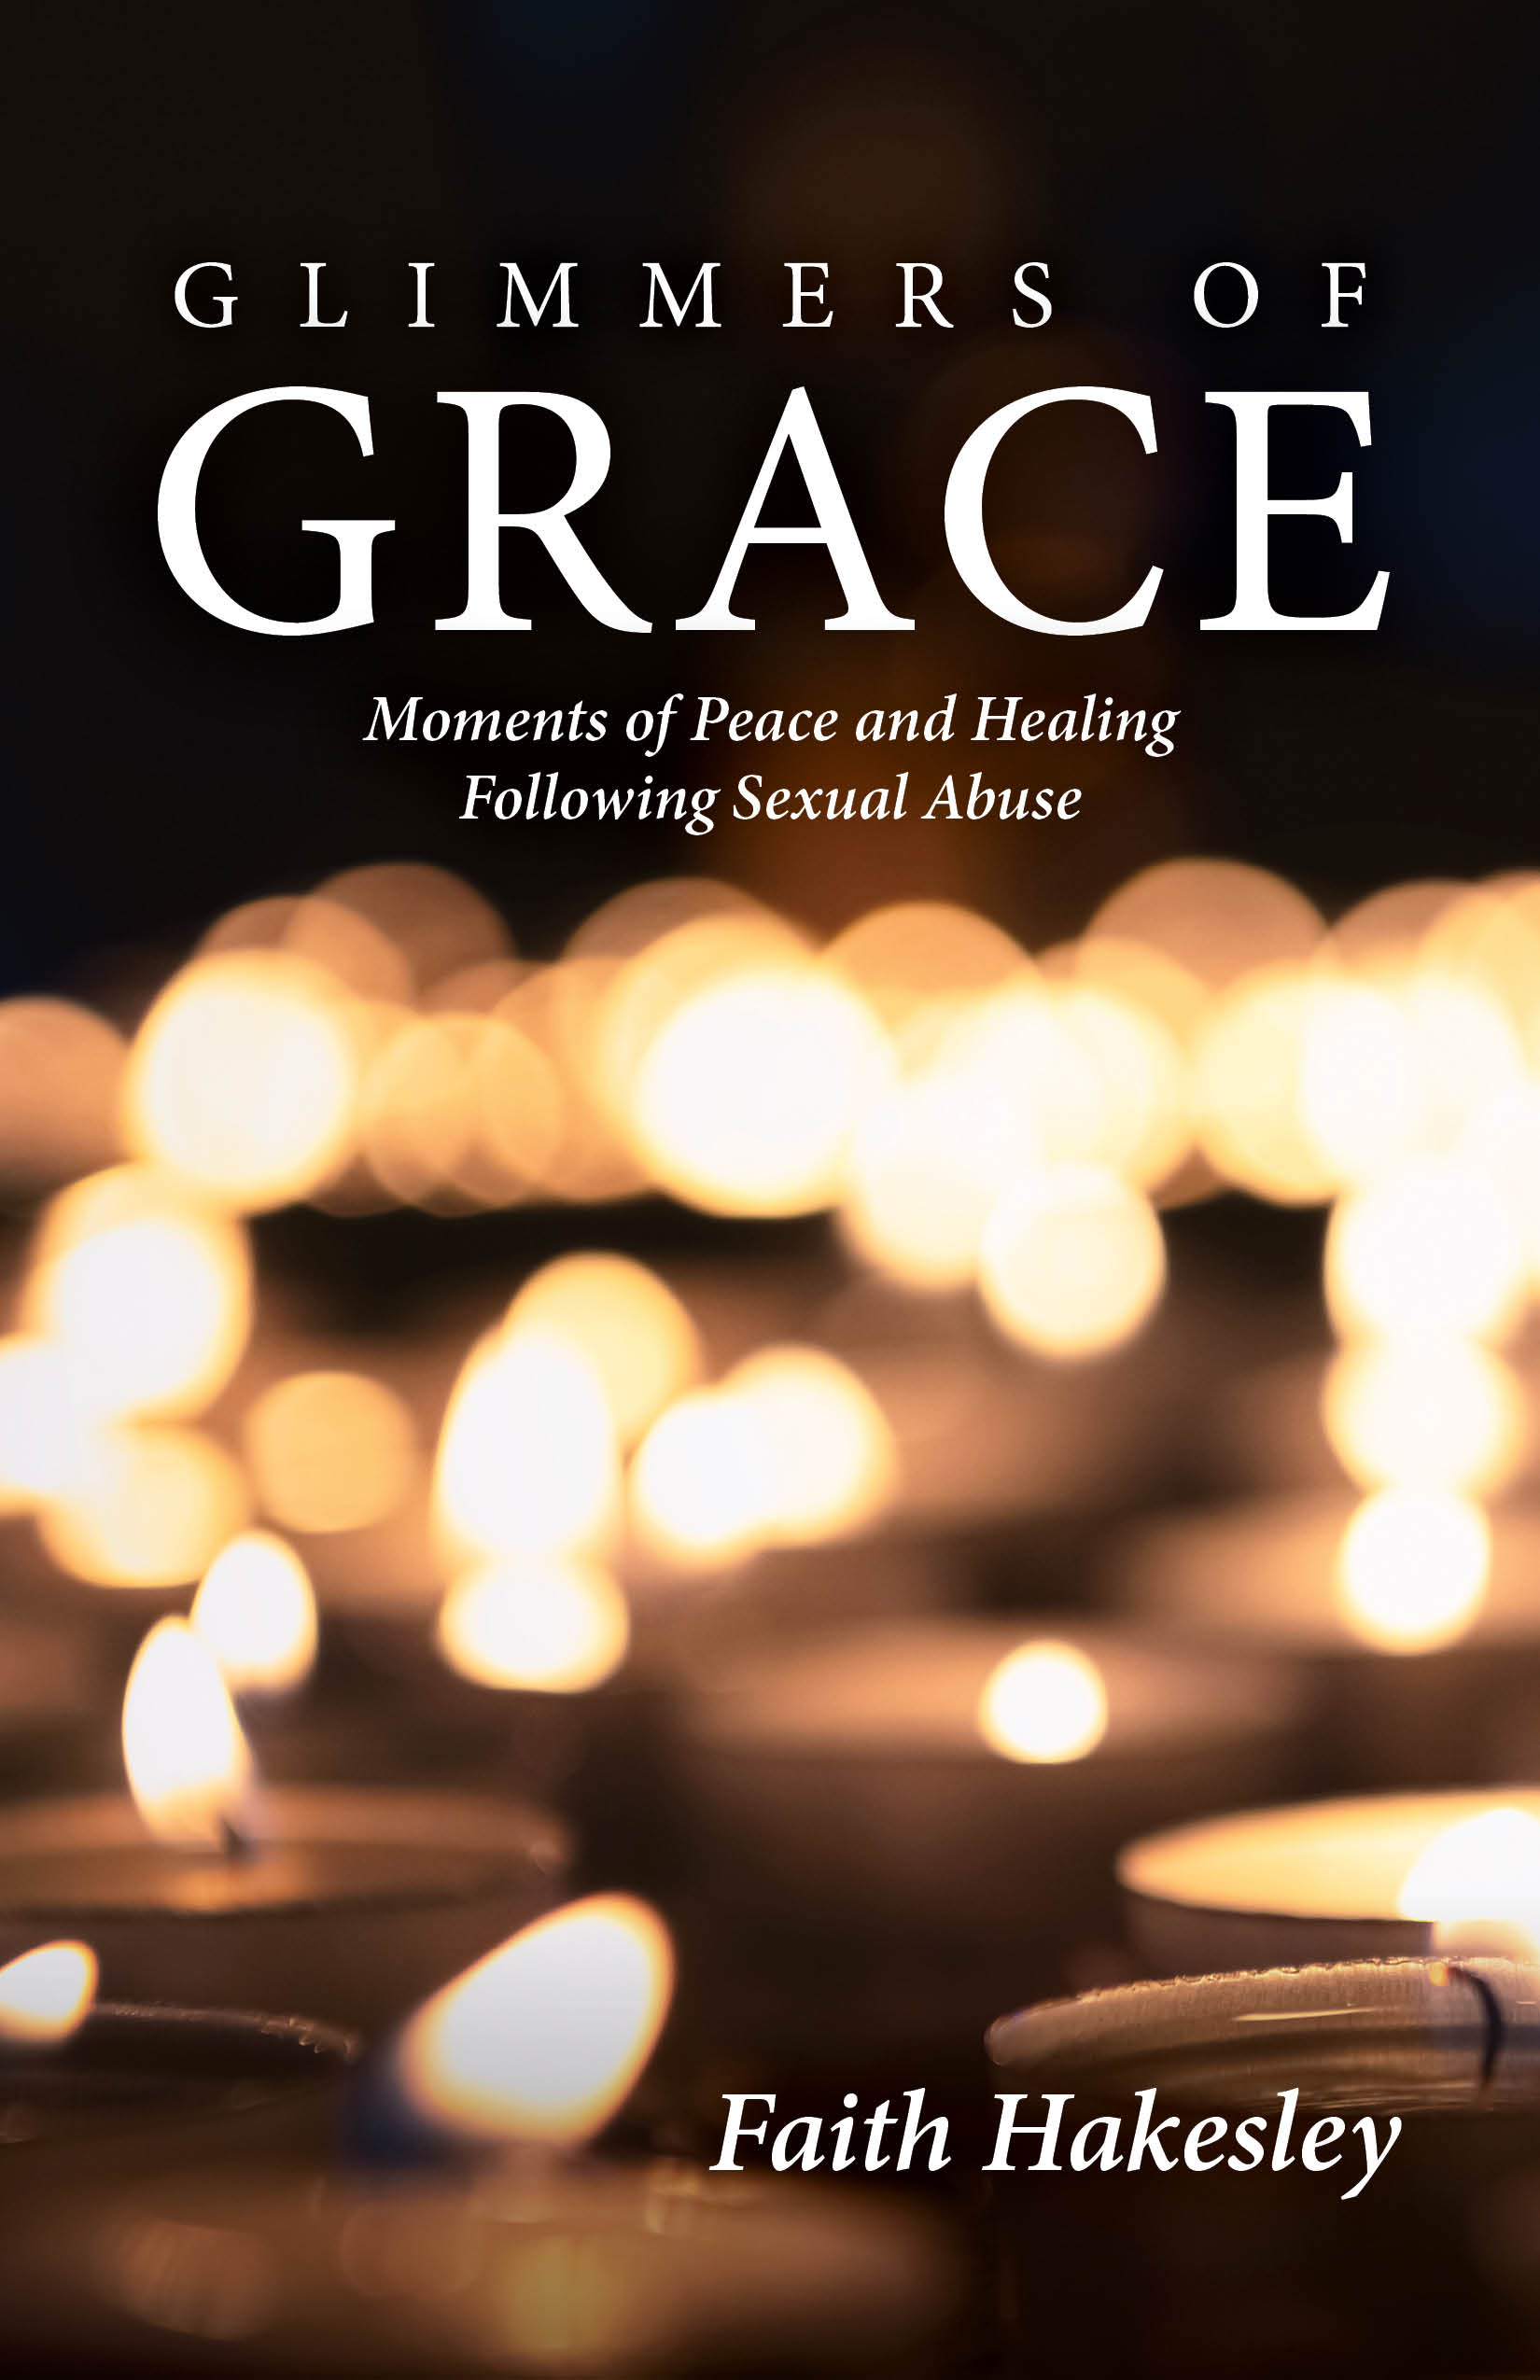 Glimmers of Grace / Faith Hakesley